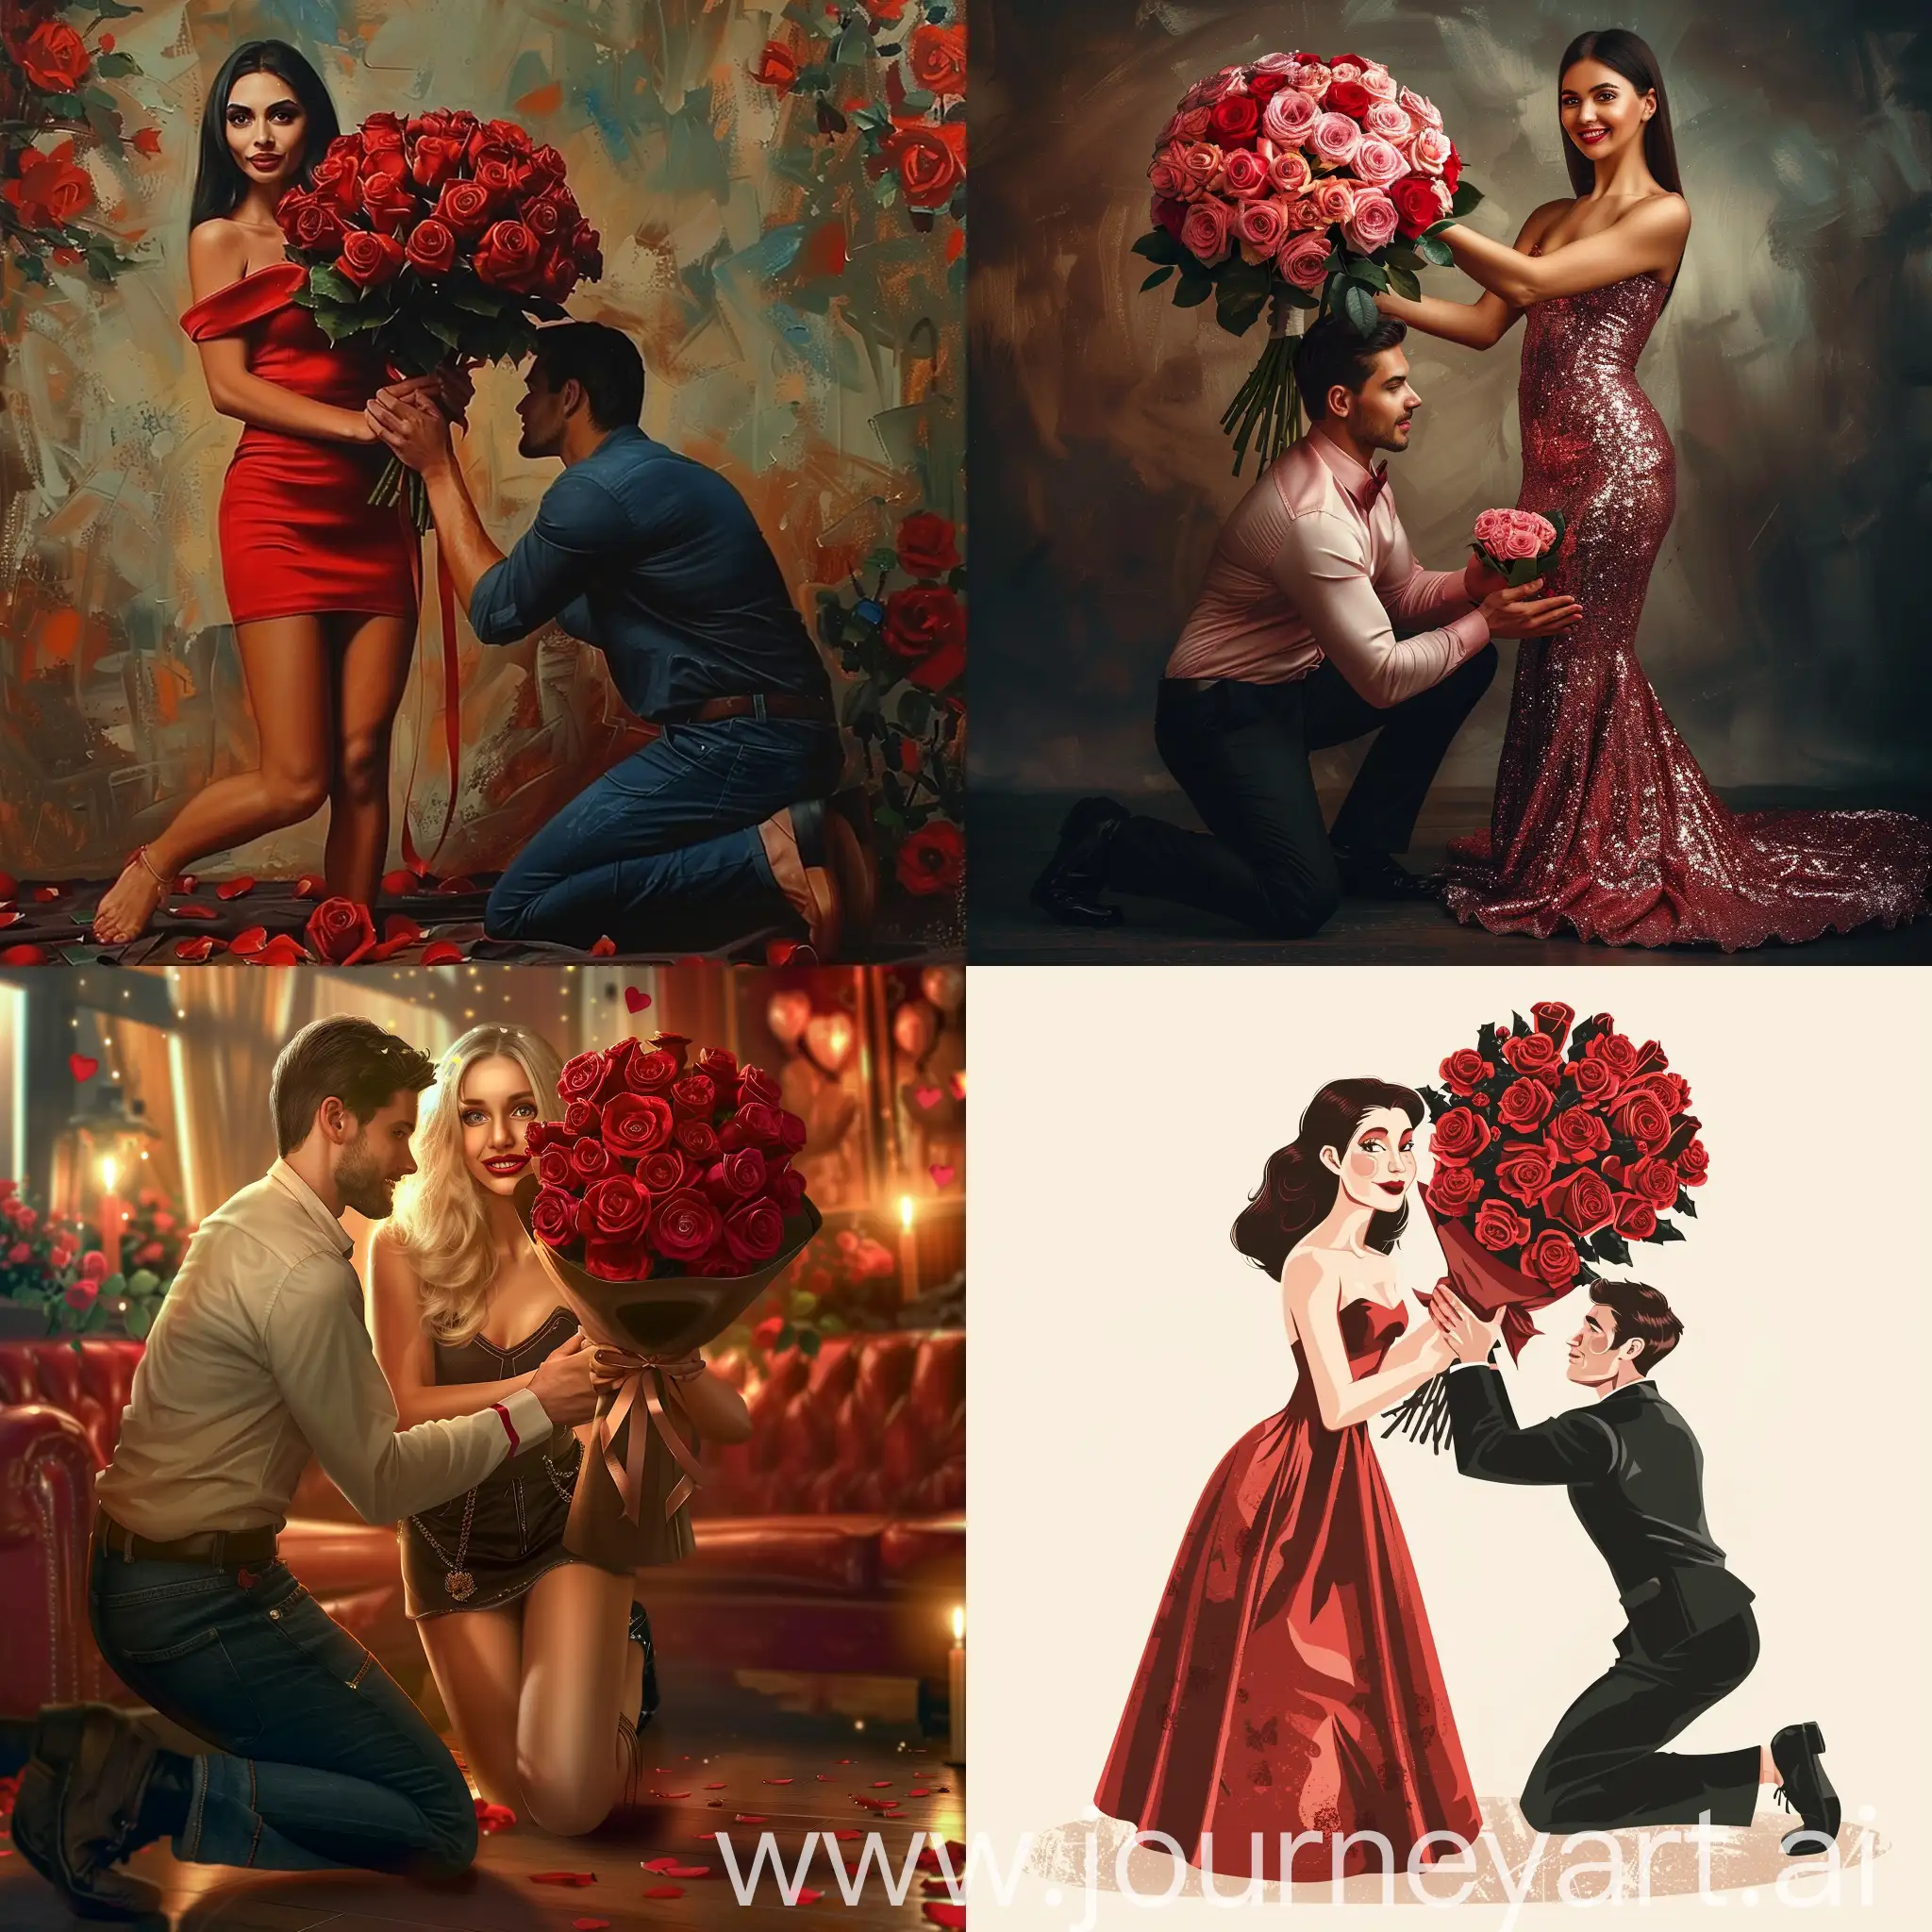 A richest girls with Valentine’s Day. She has a man that gives her big bouquet of roses with kneeled down post . A woman she is a big madam that so beautiful and richest in the world. And she’s celebrated valentines with her boy. 